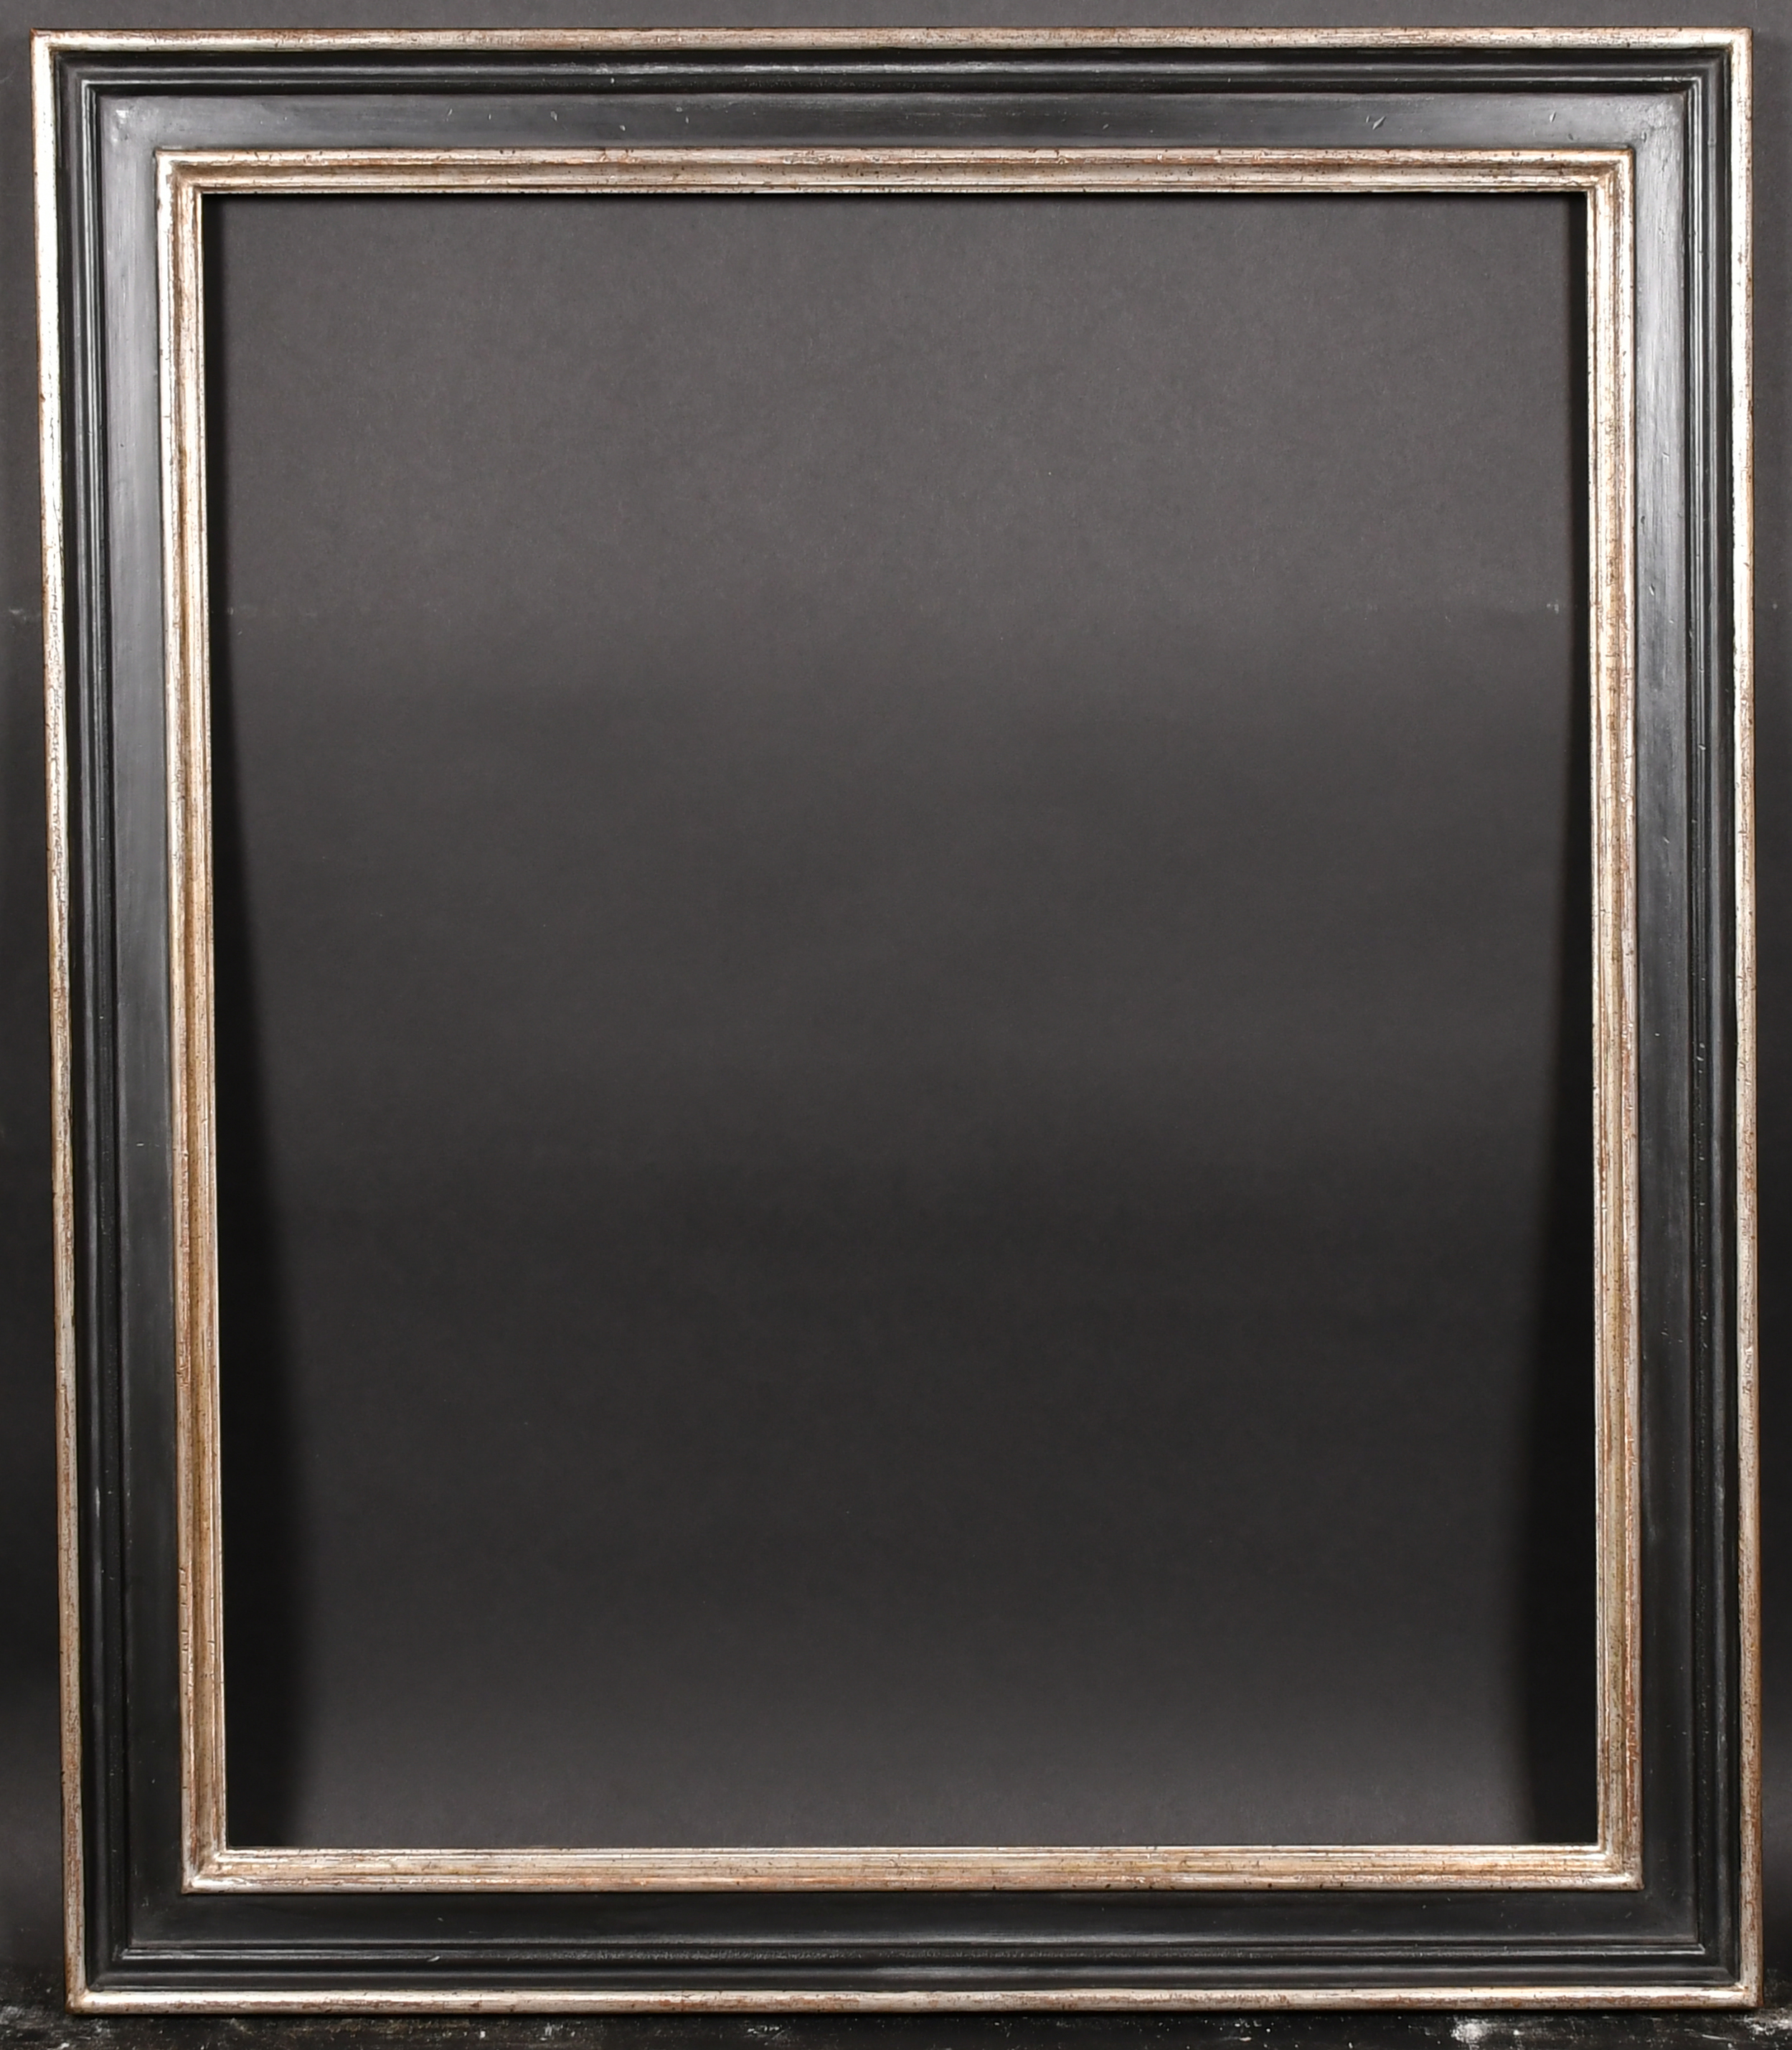 20th Century English School. A Black and Silver Composition Frame, rebate 29.75" x 24.75" (75.6 x - Image 2 of 3